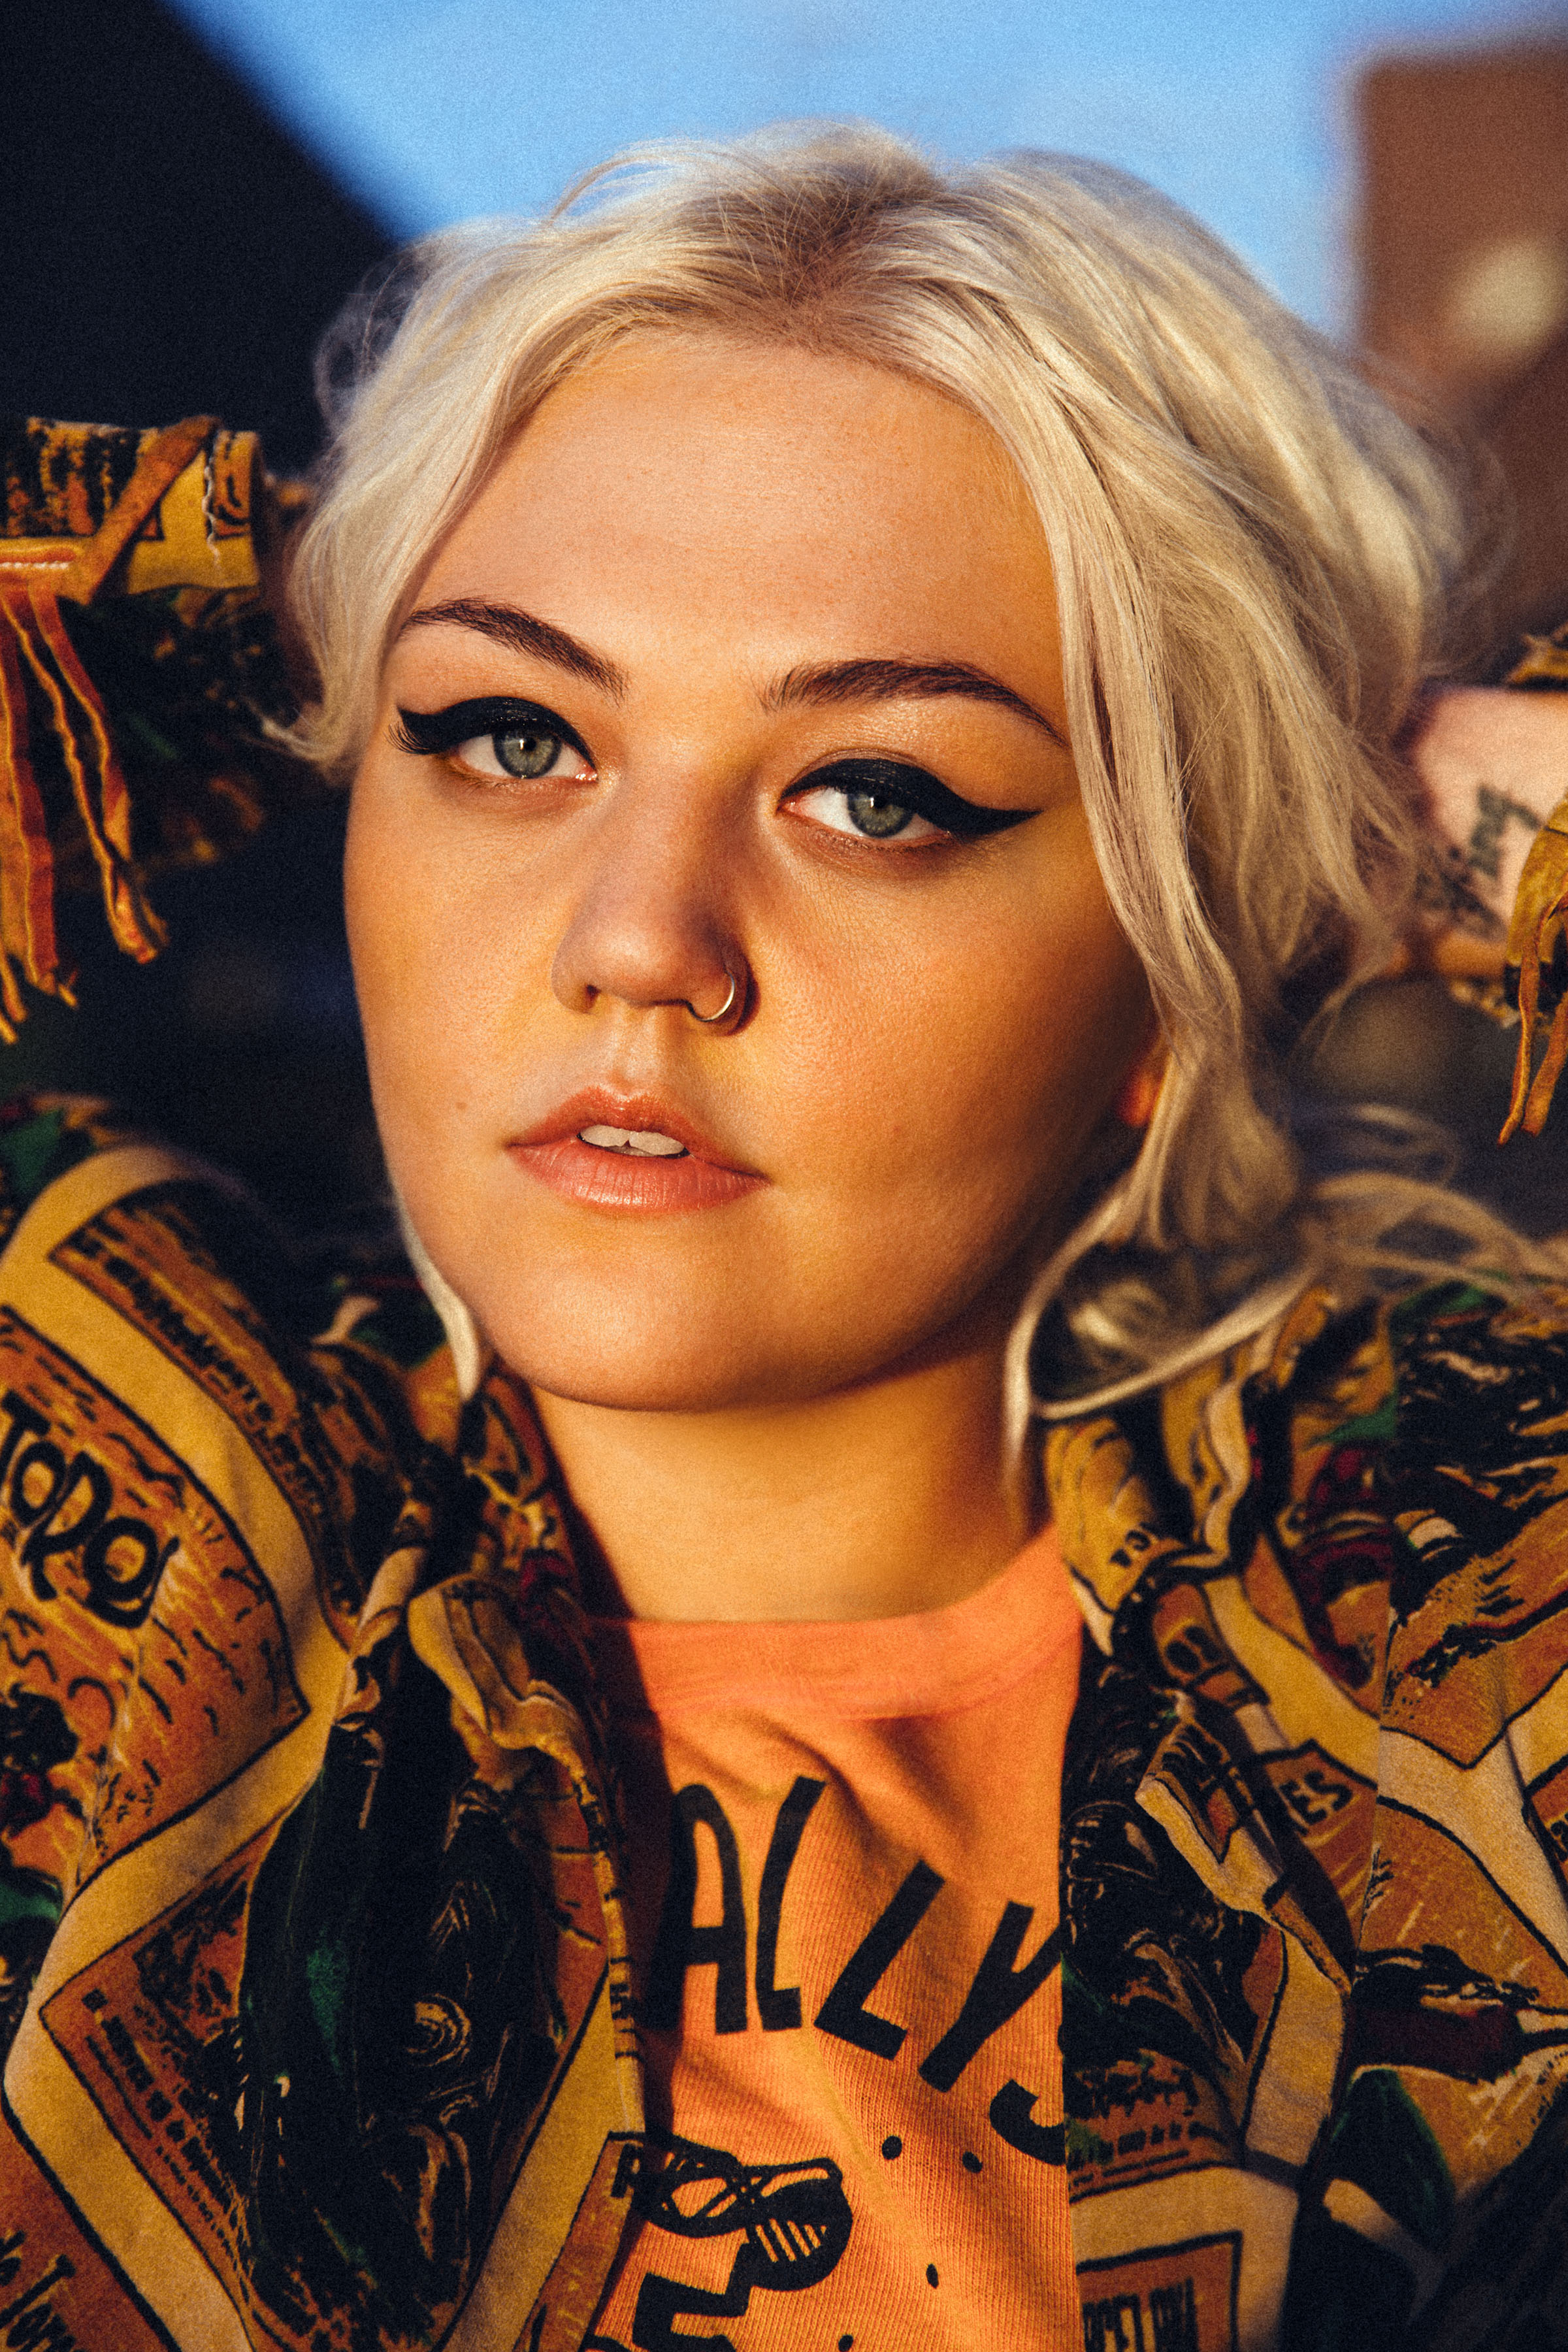 Rising blues-rock star. Elle King will bring her sultry sound to the “Largest Music Festival in Motorcyling™“ on Monday, Aug. 8